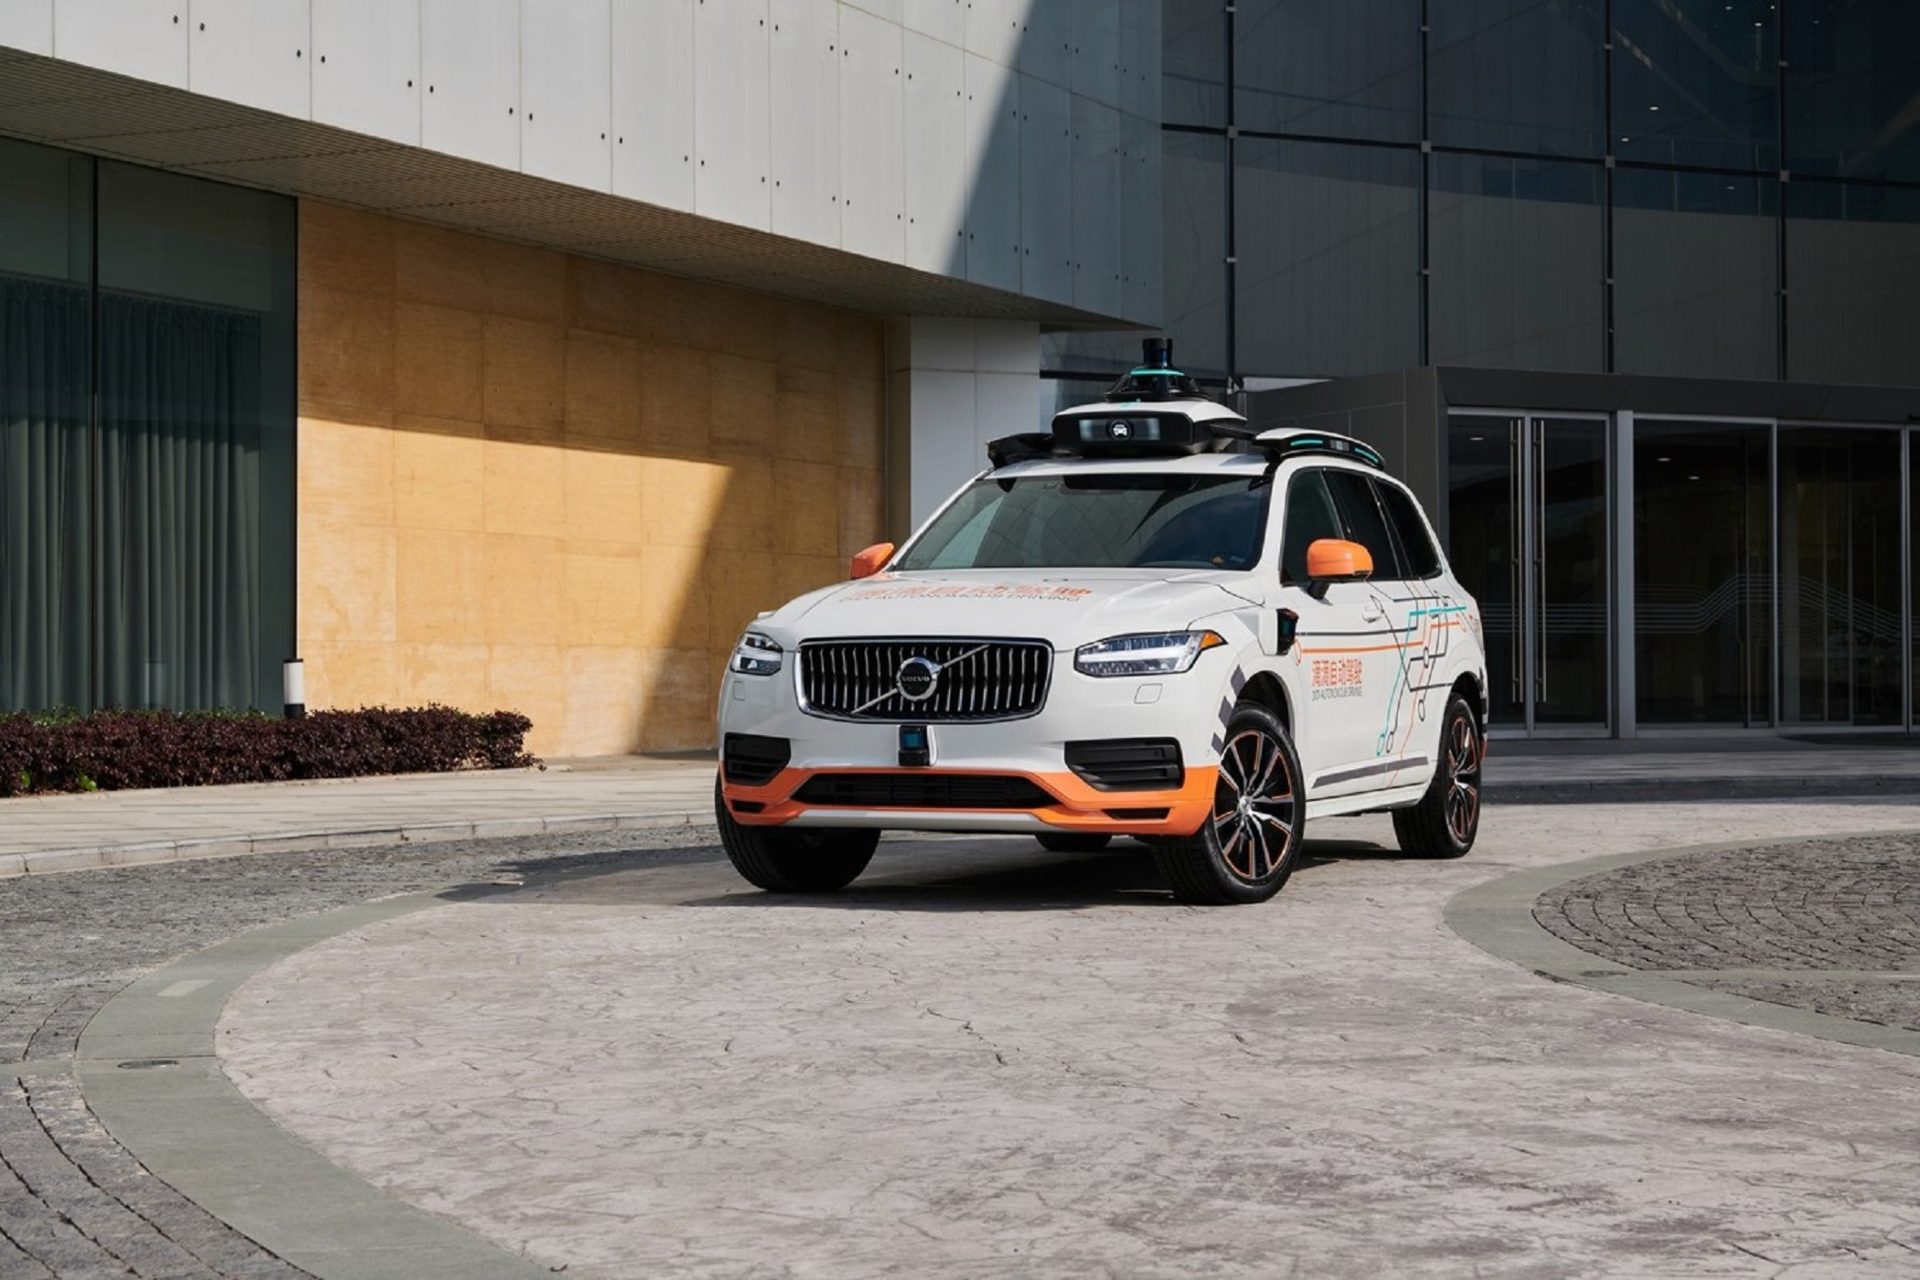 A Volvo prototype of a self-driving car.